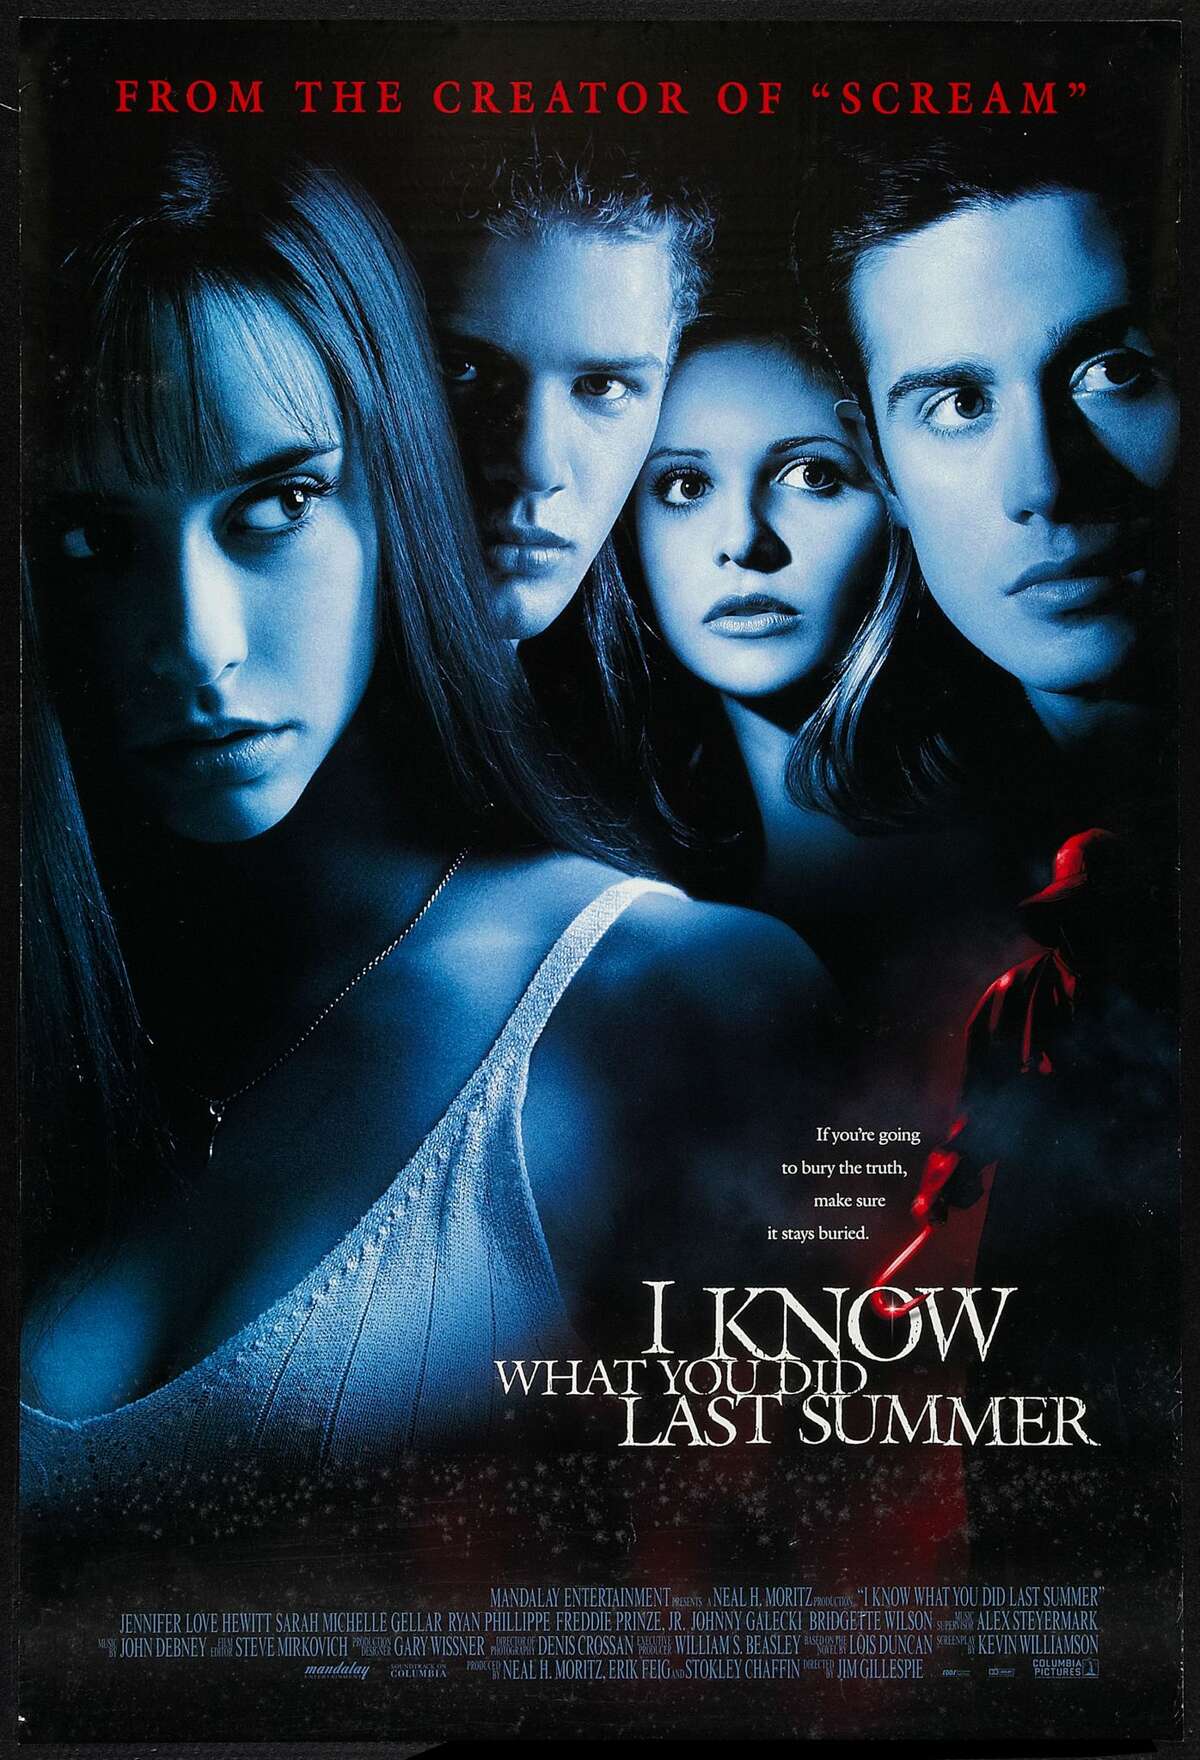 Poster for the movie 'I Know What You Did Last Summer,' 1997.